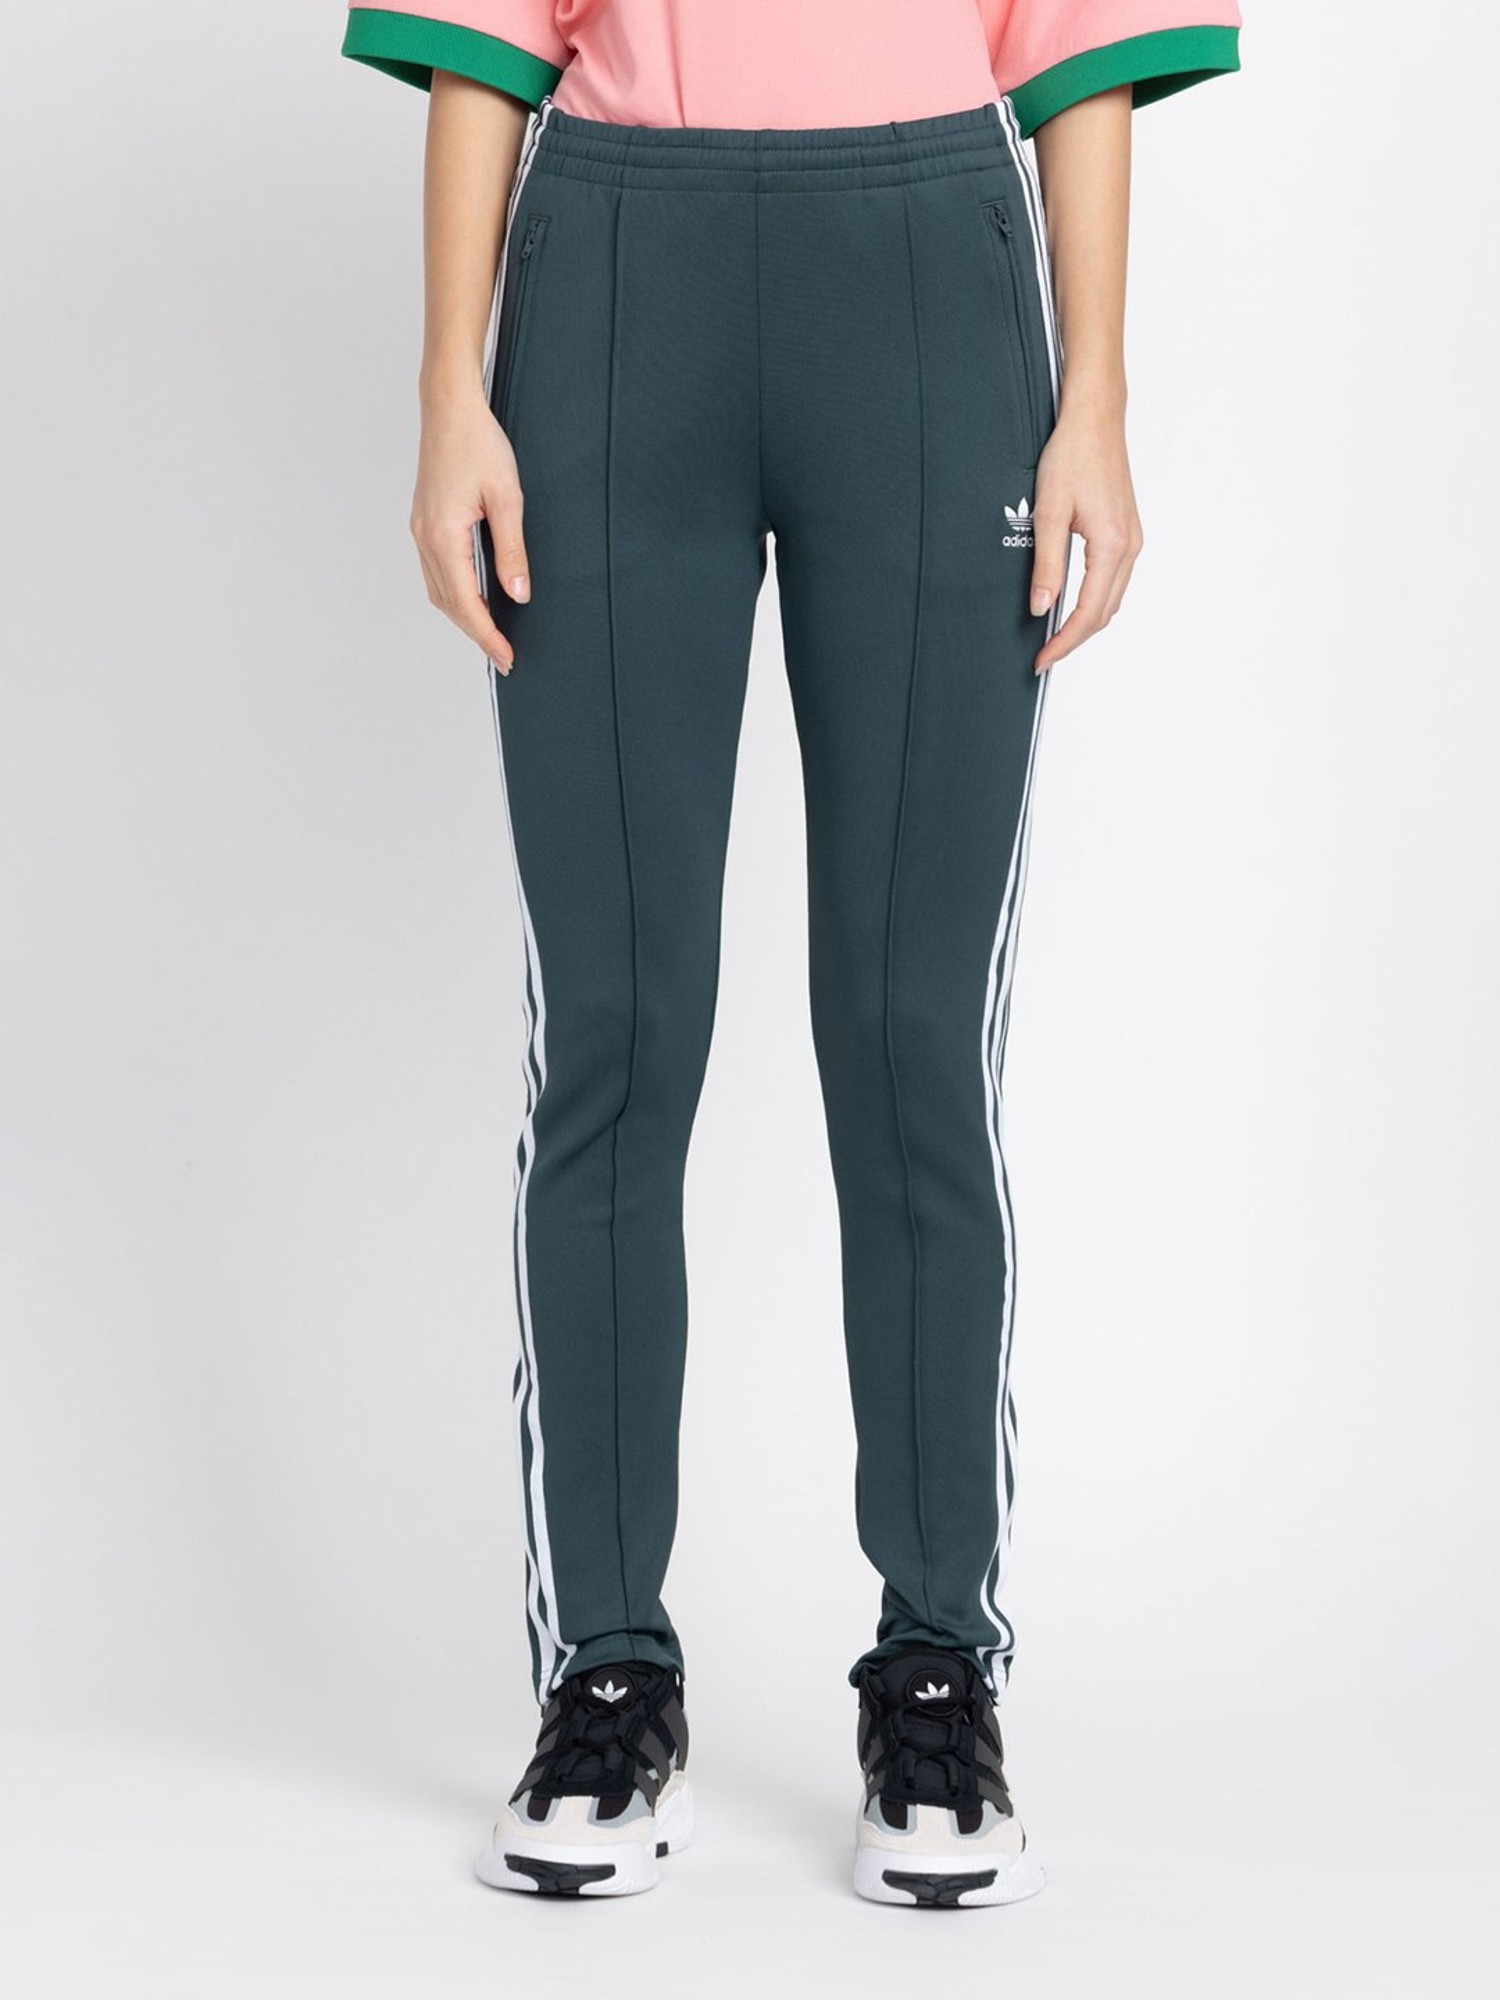 Buy Genuine Adidas Women Track Pants Online At Best Prices